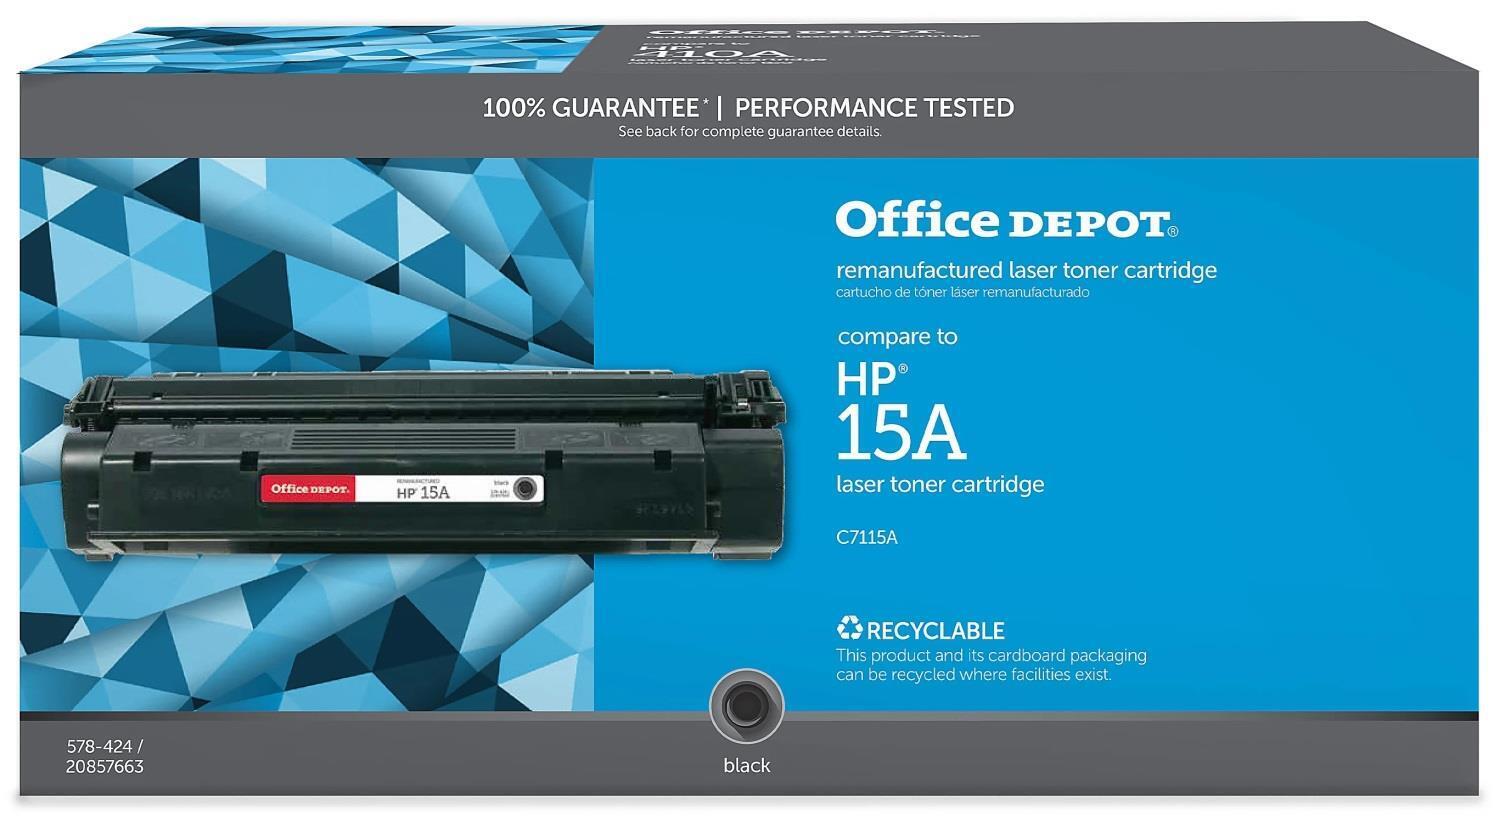 New Office Depot Black Toner Cartridge Replaces HP 15A